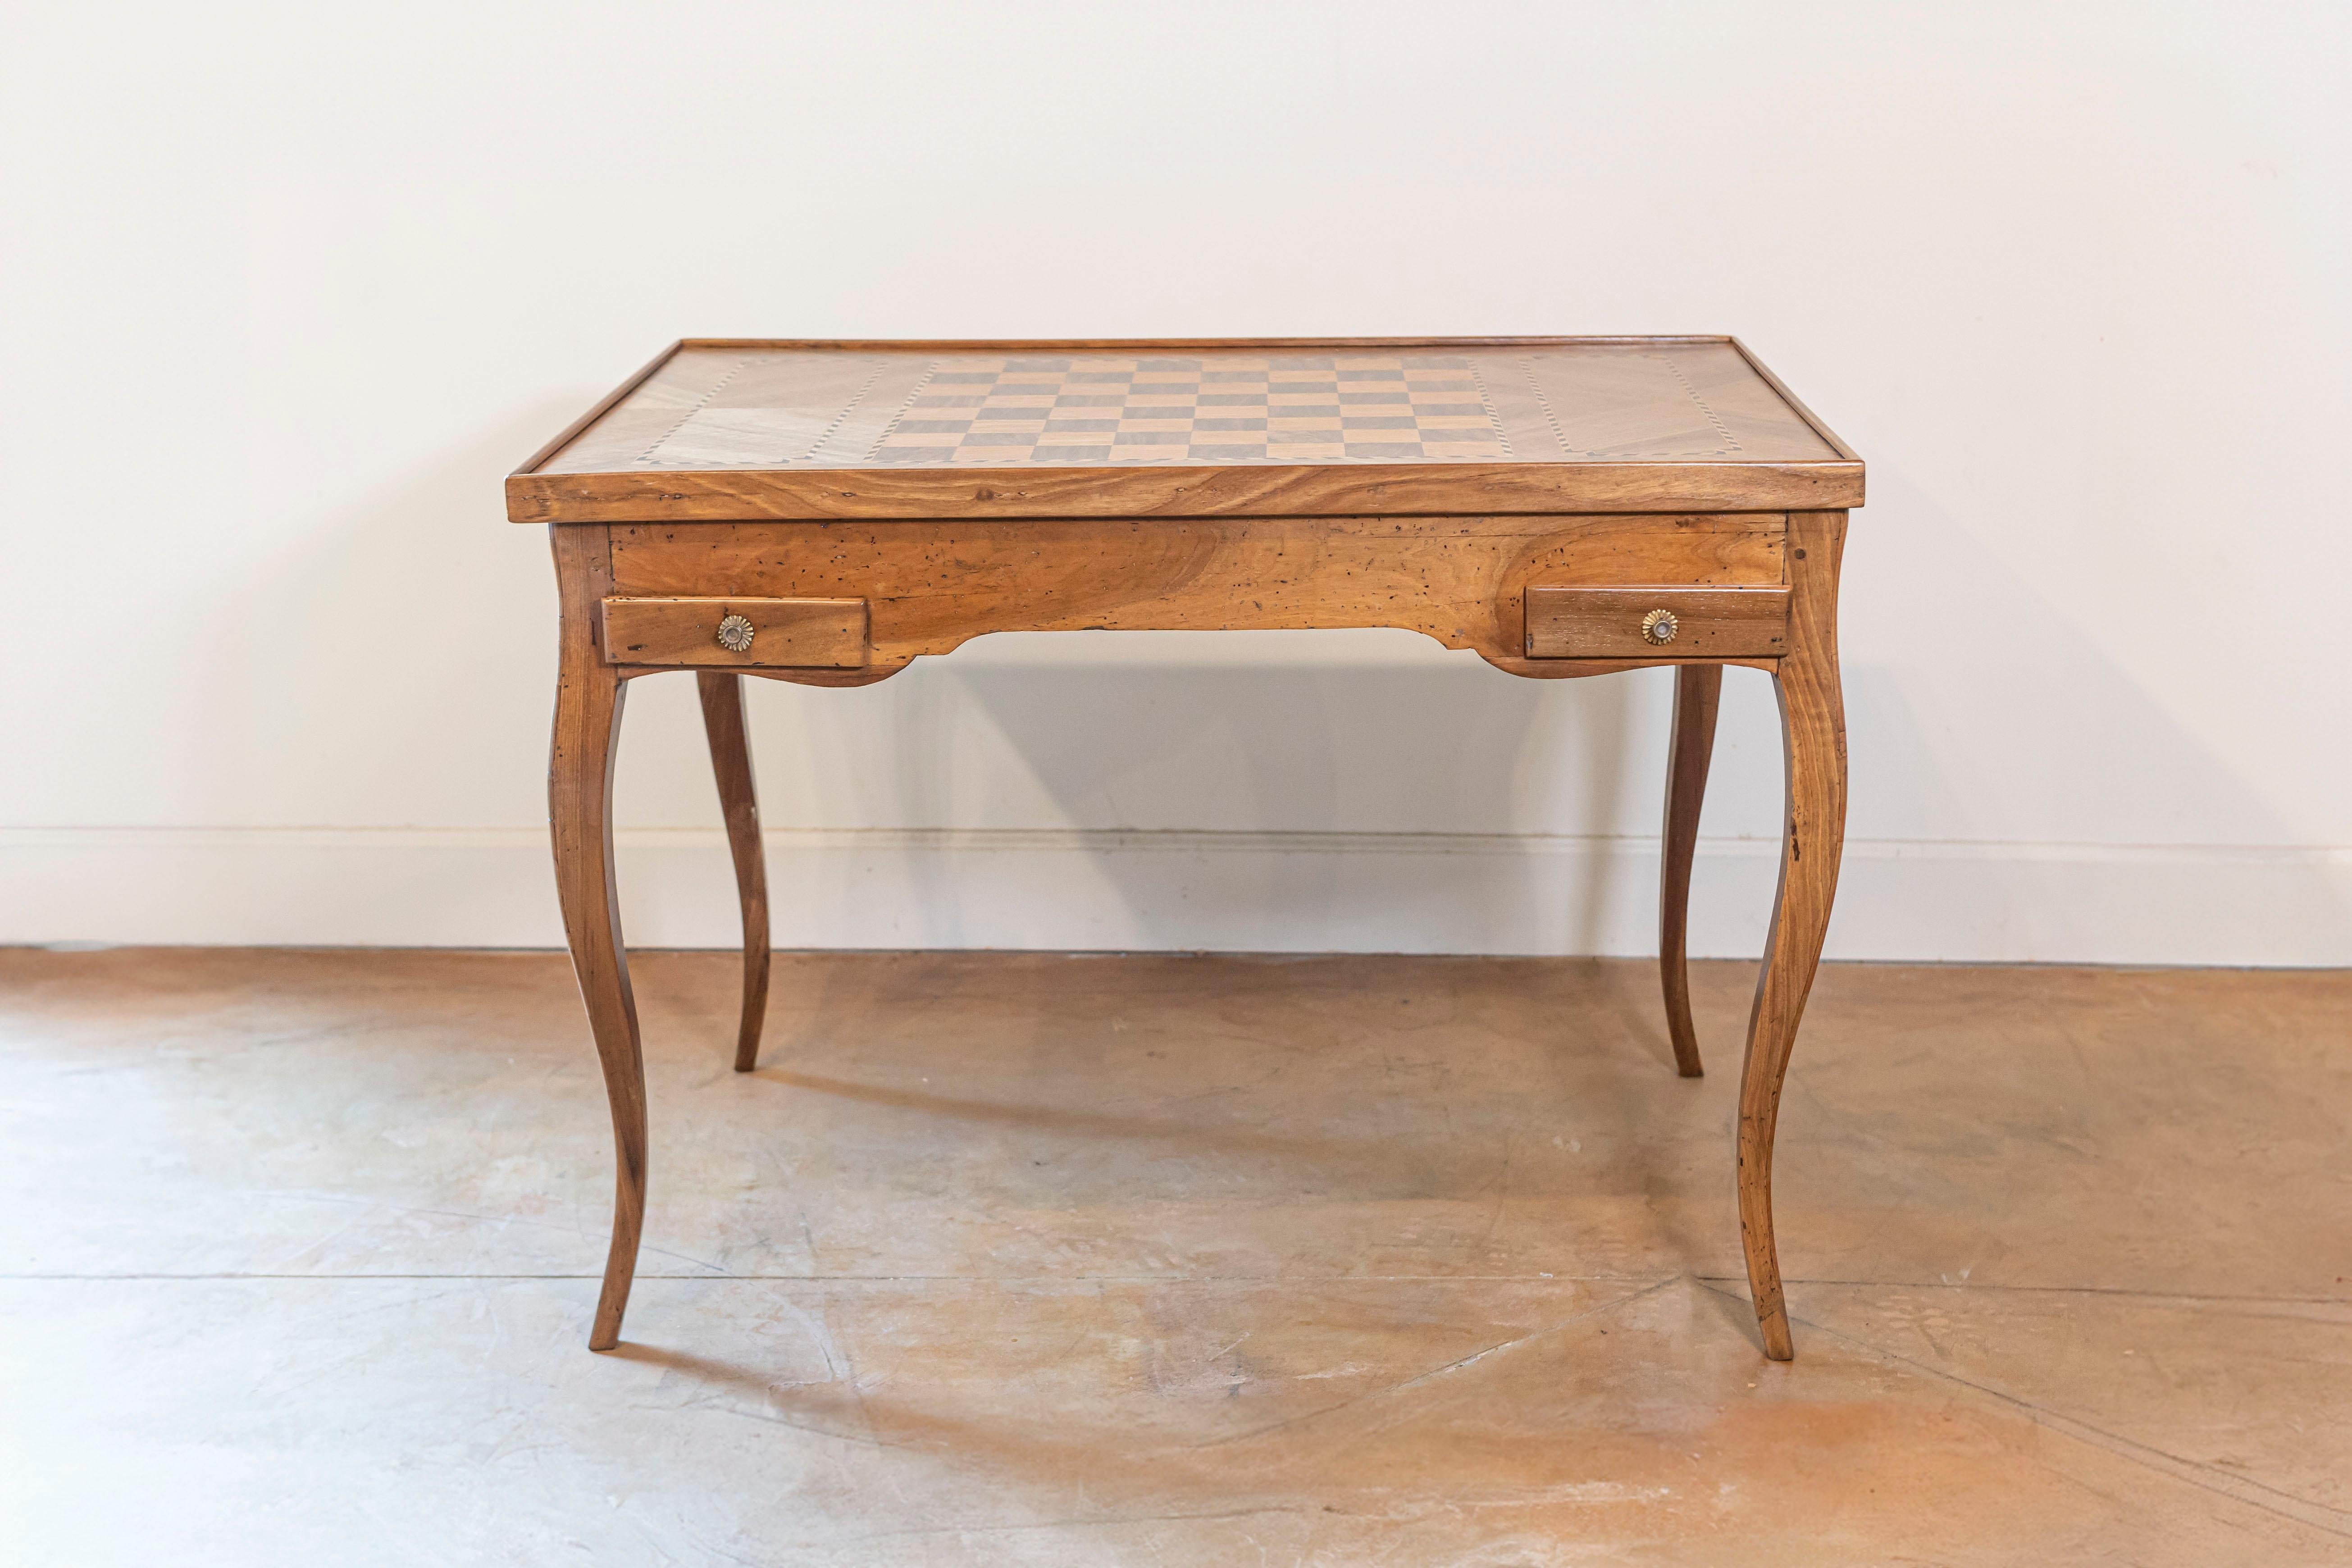 A French Louis XV tric trac game table from circa 1790 made of walnut and walnut veneer, with reversible top, marquetry and cabriole legs. This exquisite French Louis XV tric trac game table, dating back to around 1790, is a testament to the